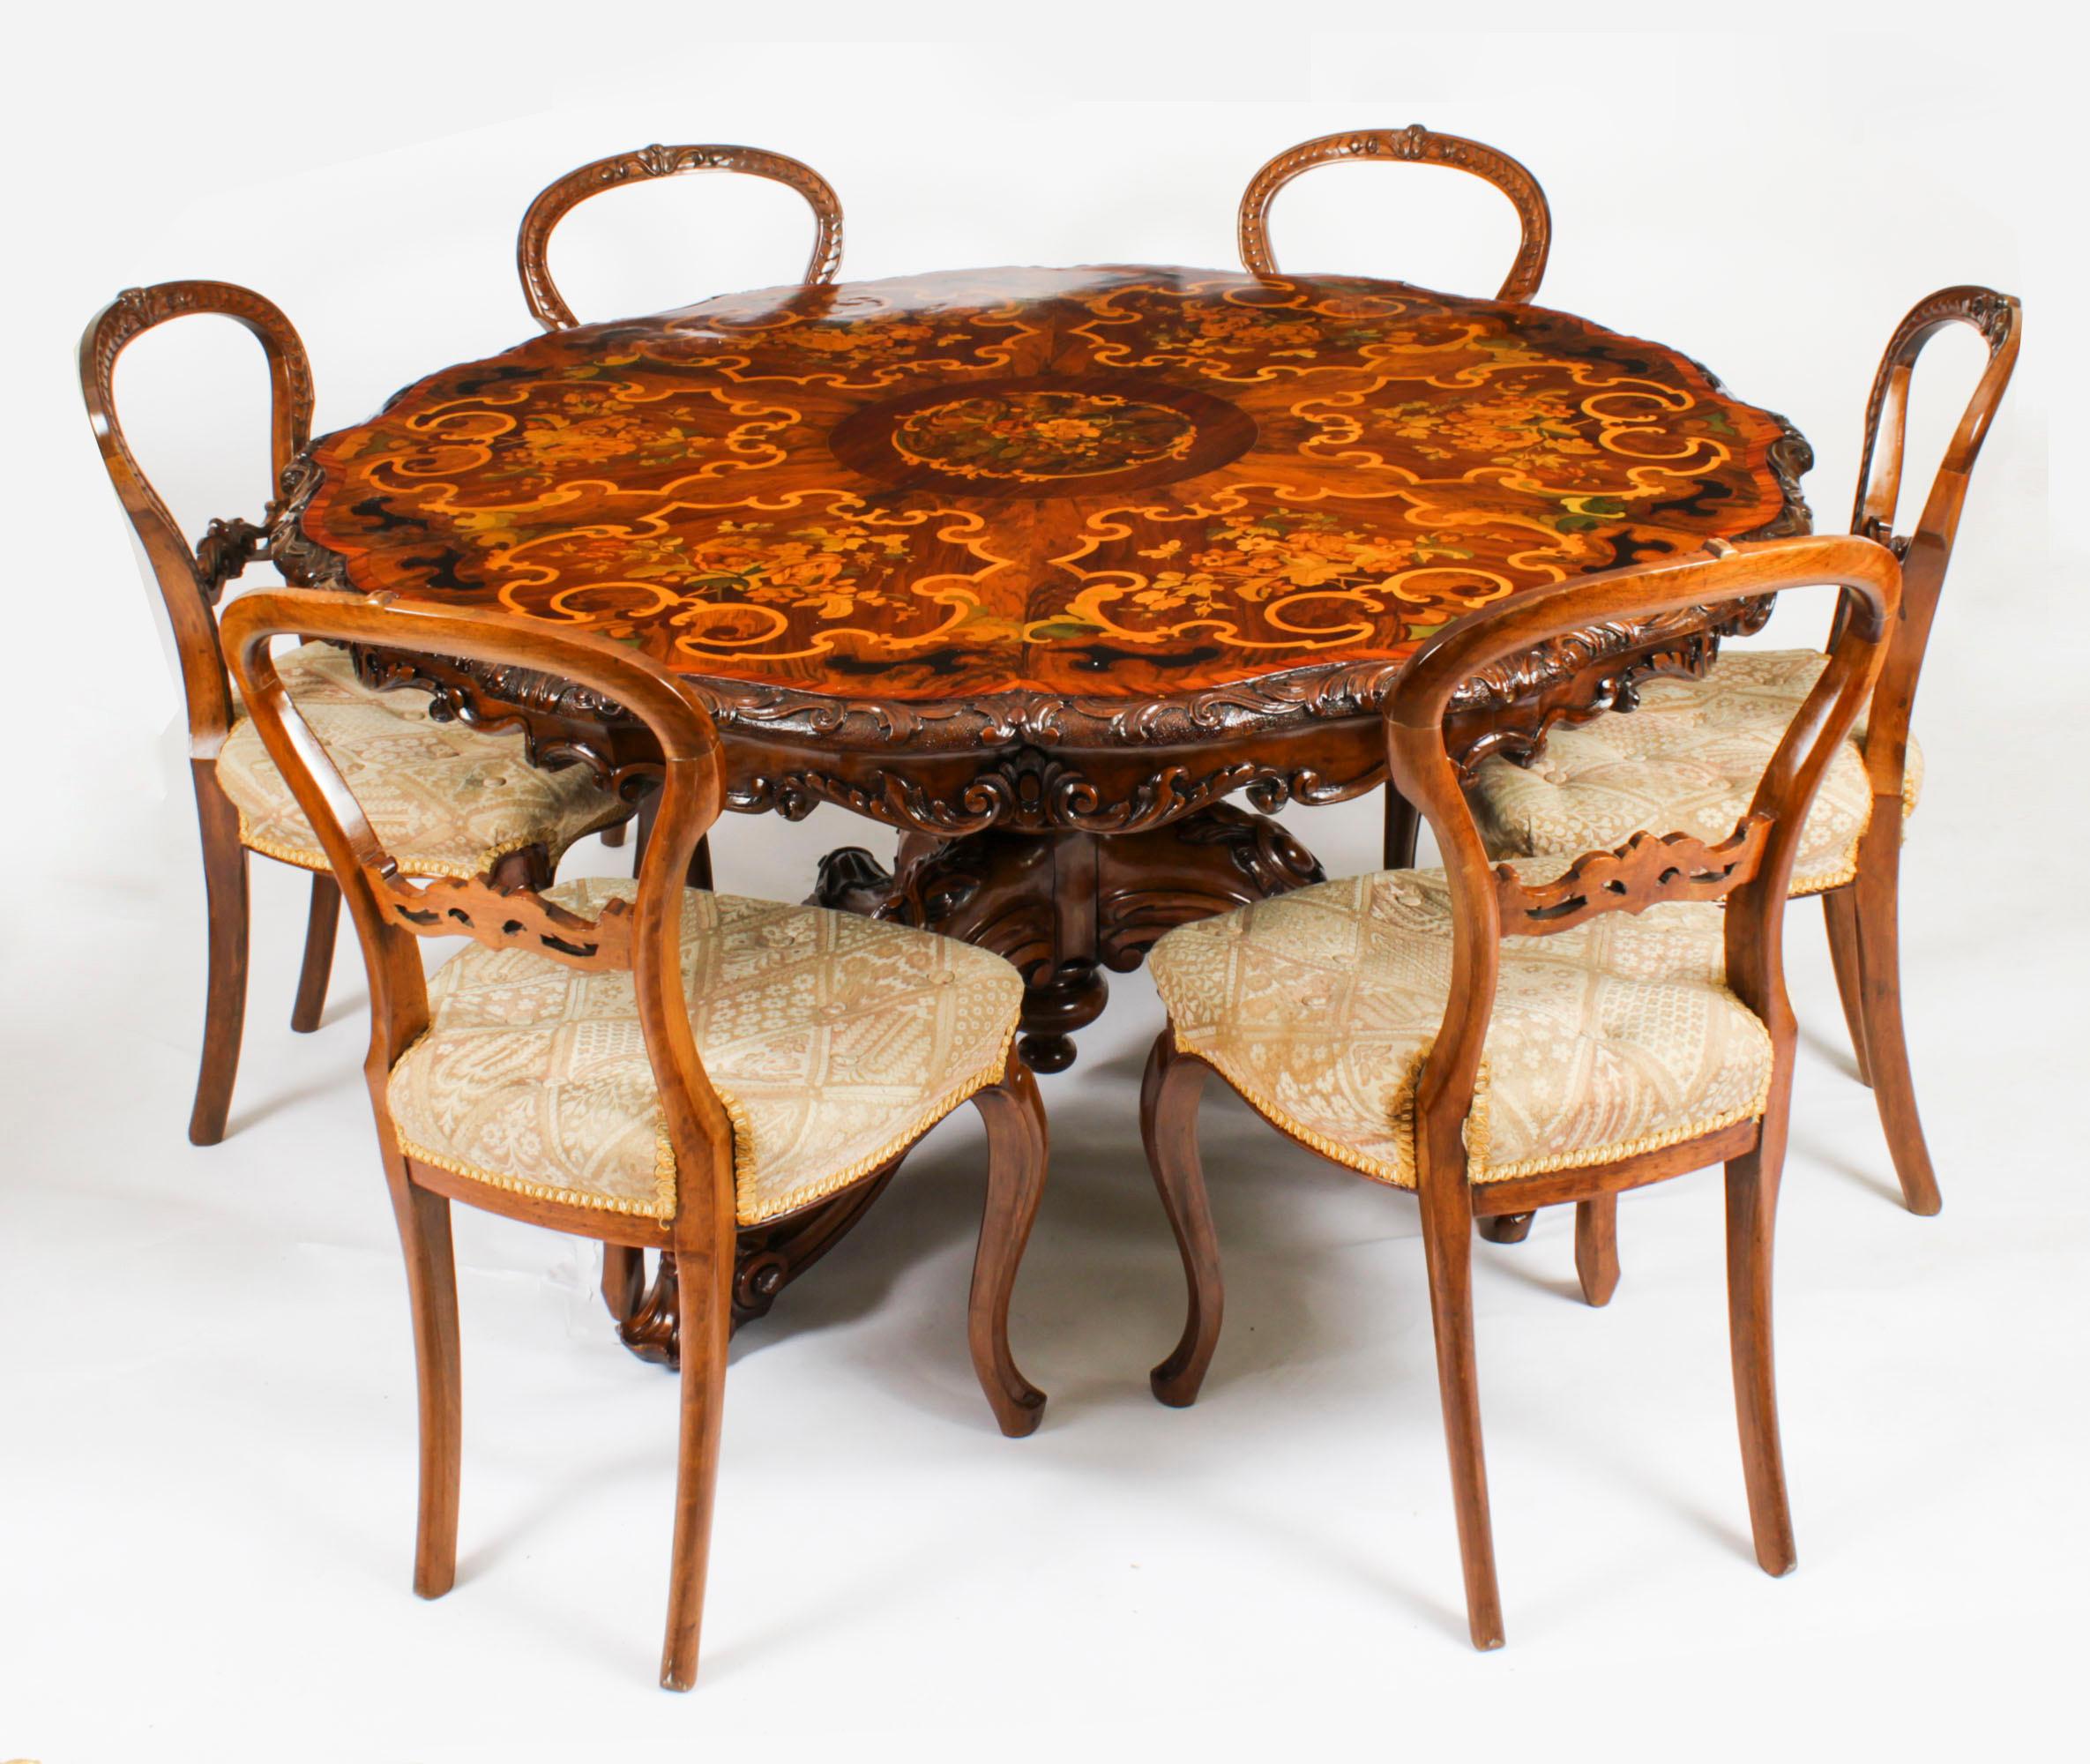 This is an fine and rare antique English mid Victorian, burr walnut, tulip wood banded, ebonised and fruitwood marquetry, centre table, in the manner of Edward Holmes Baldock and circa 1860 in date.

The shaped segmentally veneered circular top is